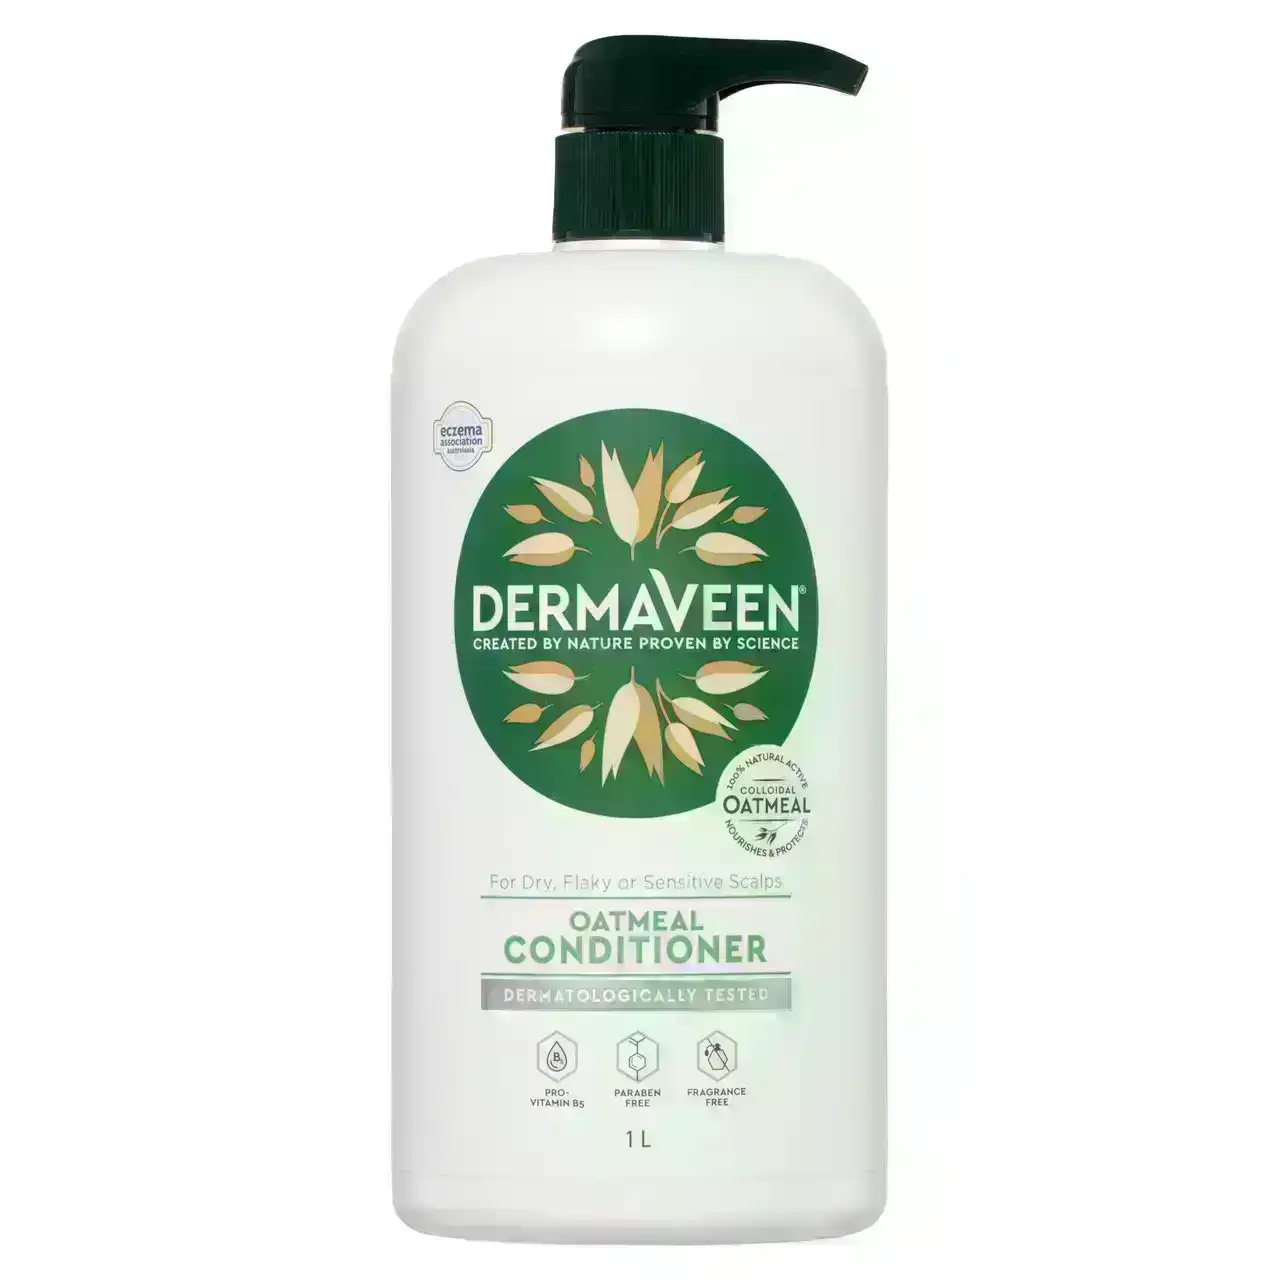 DermaVeen Oatmeal Conditioner for Dry, Flaky or Sensitive Scalps 1L